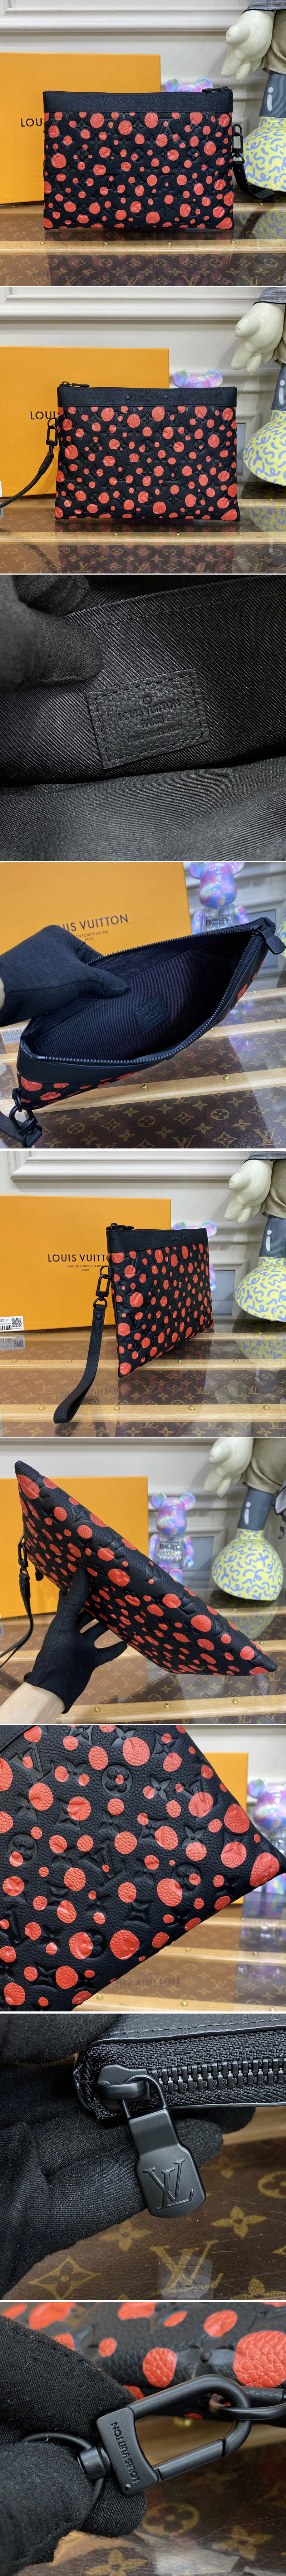 Replica Louis Vuitton M82019 LV LVxYK Pochette To Go Bag in Black and red Taurillon Monogram cowhide with Infinity Dots print